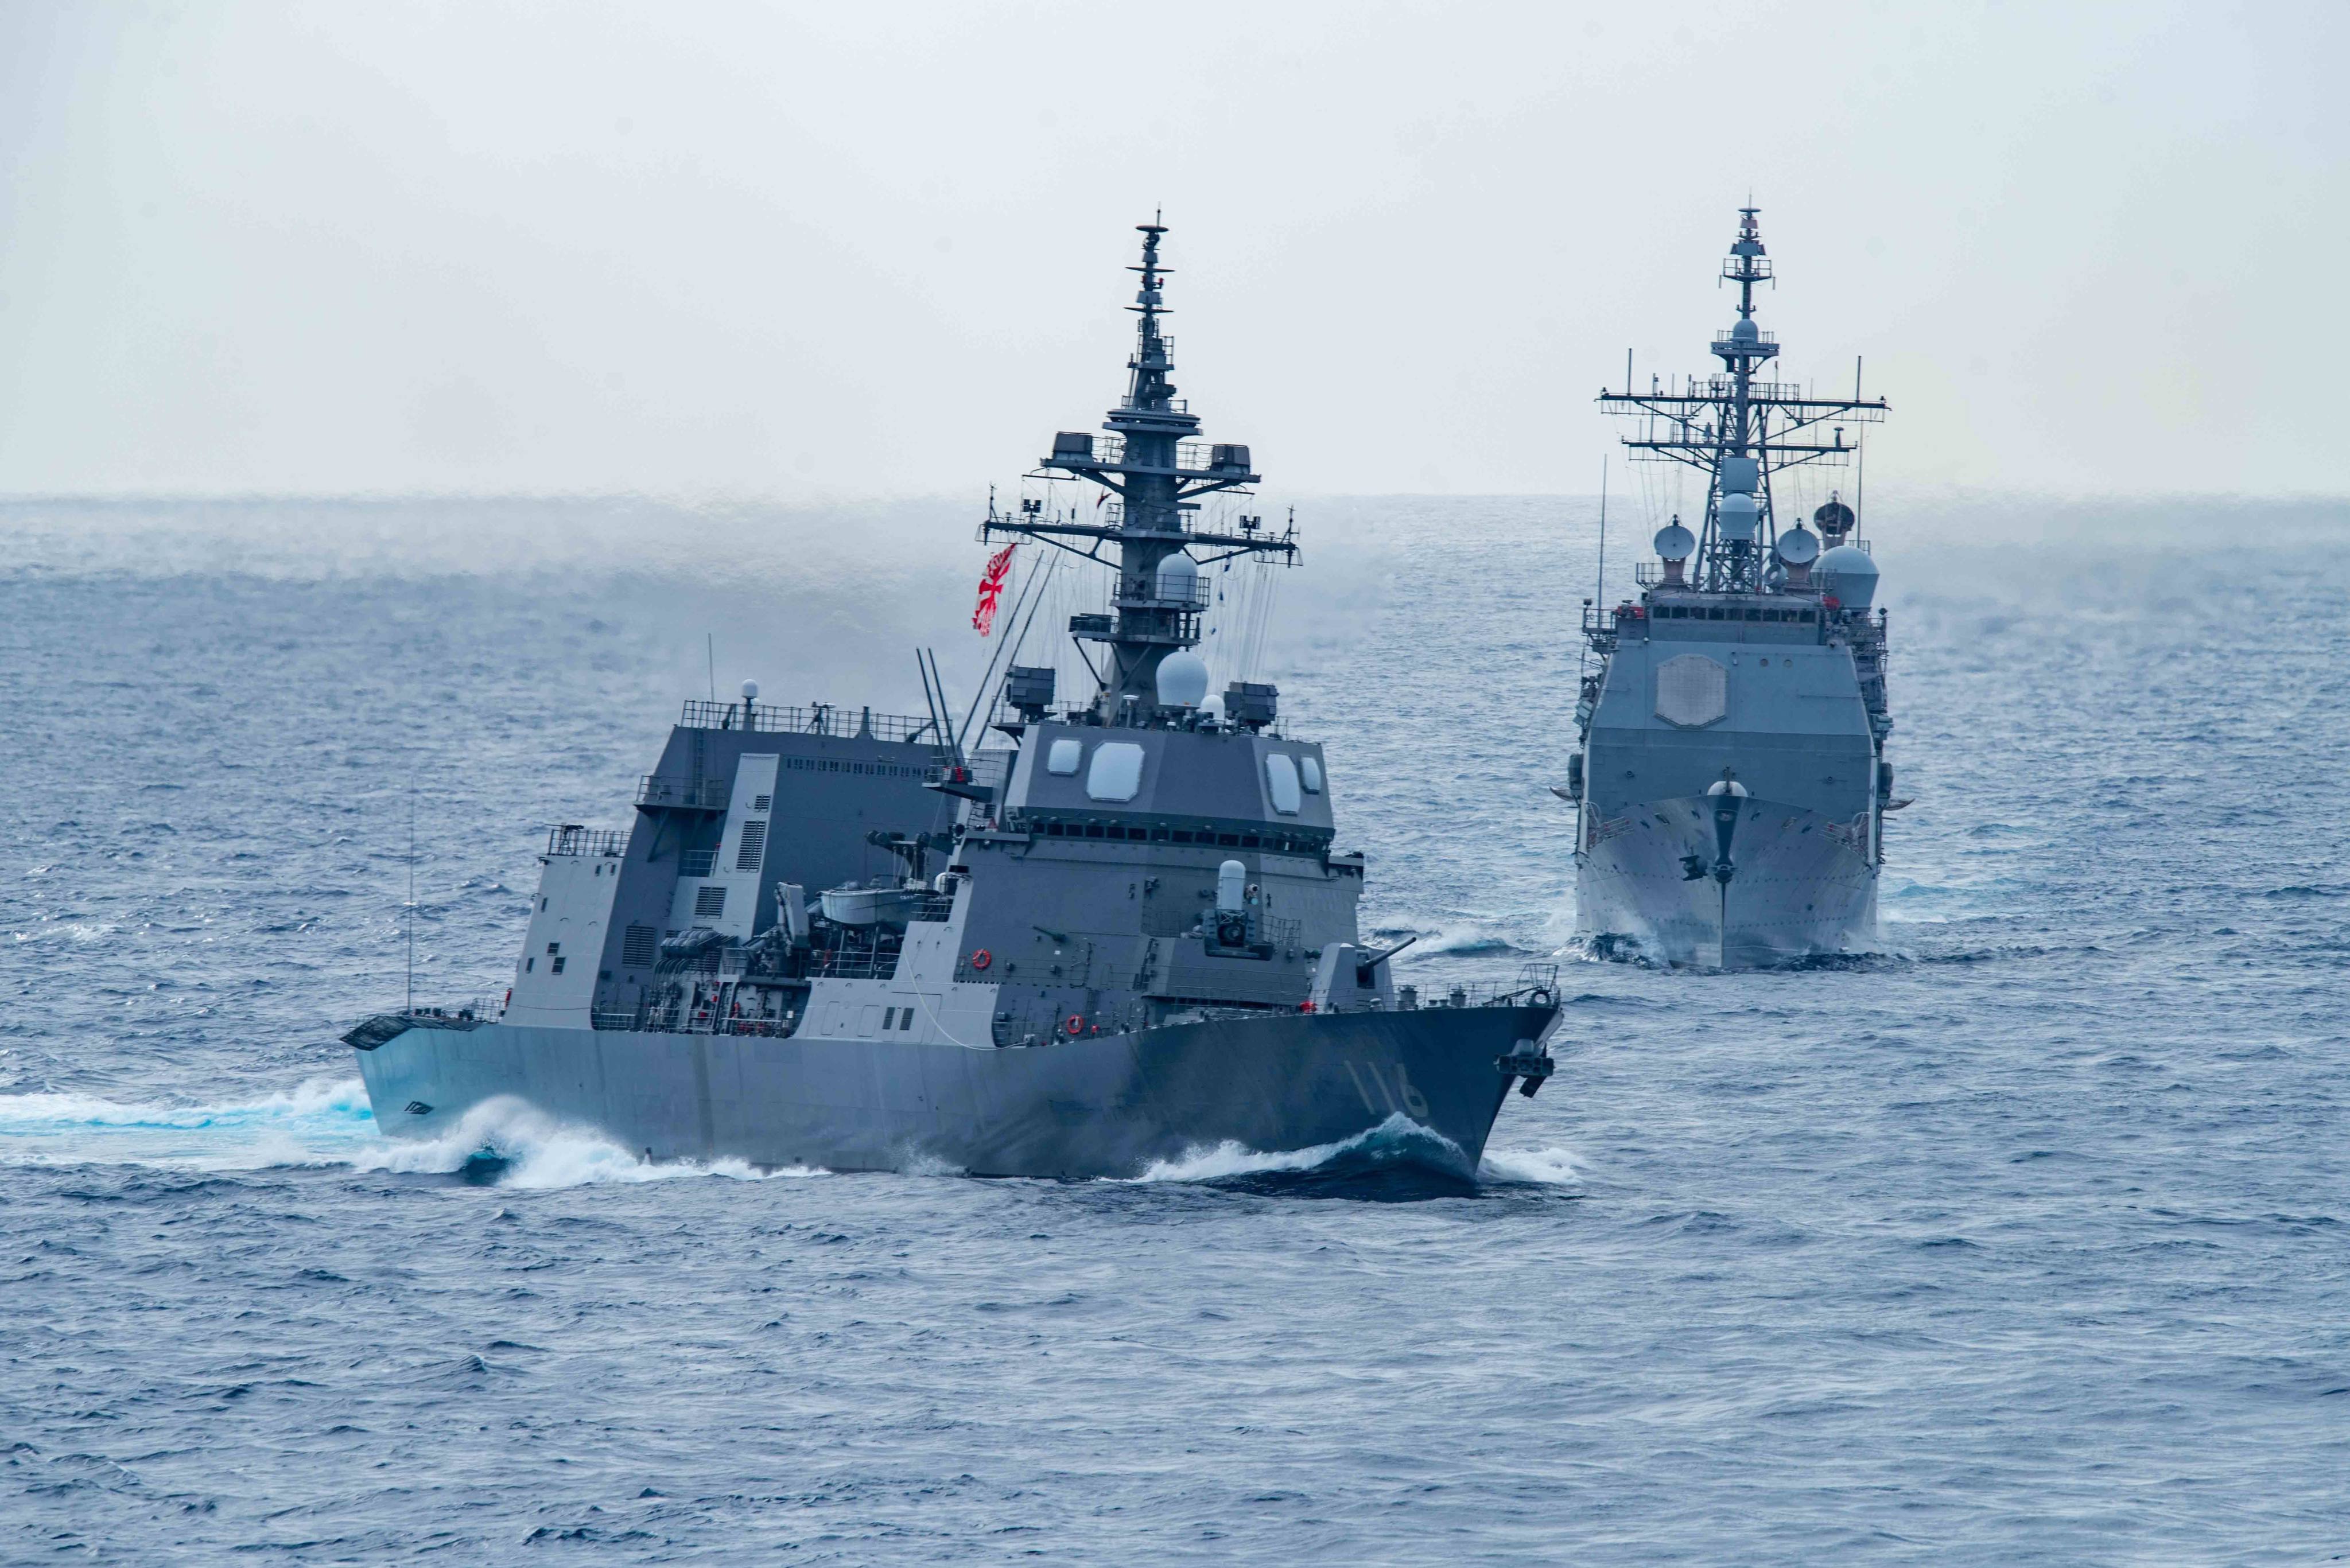 The US and Japan routinely conduct joint naval drills. The European Union is reportedly seeking a security deal with Japan that could include such exercises in the Indo-Pacific. Photo: US Navy